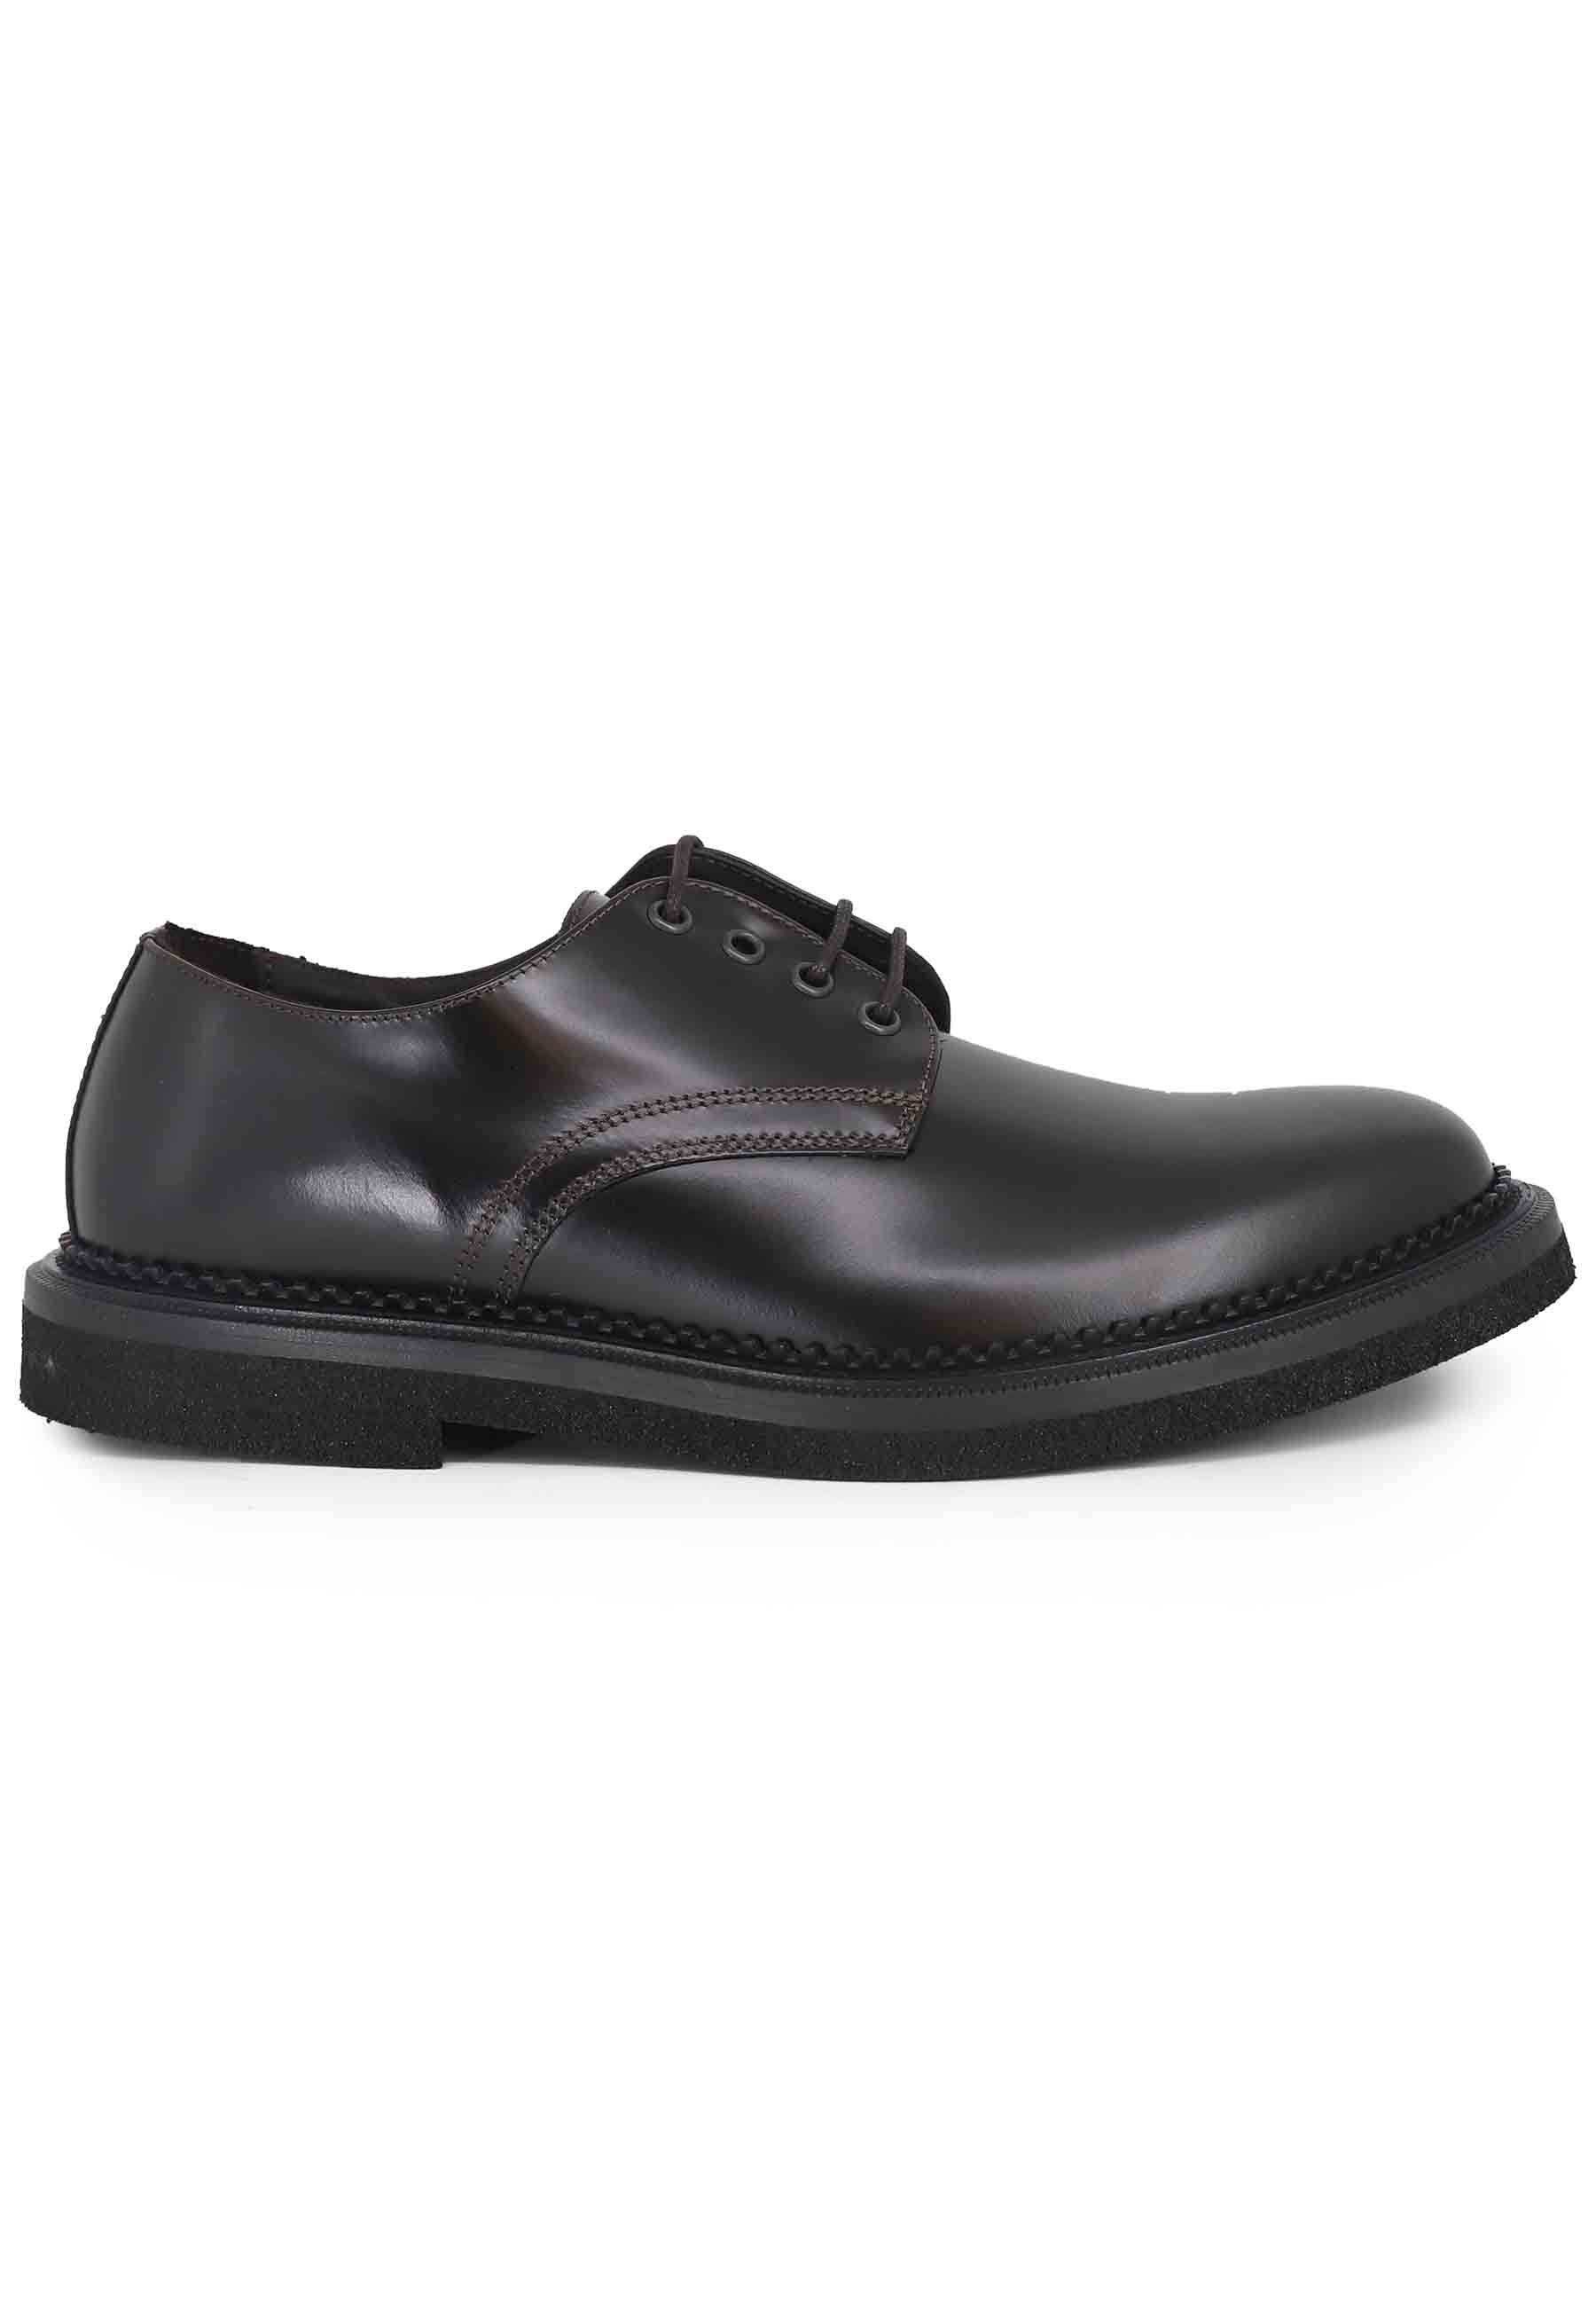 Men's lace-ups in shiny dark brown leather with rubber sole